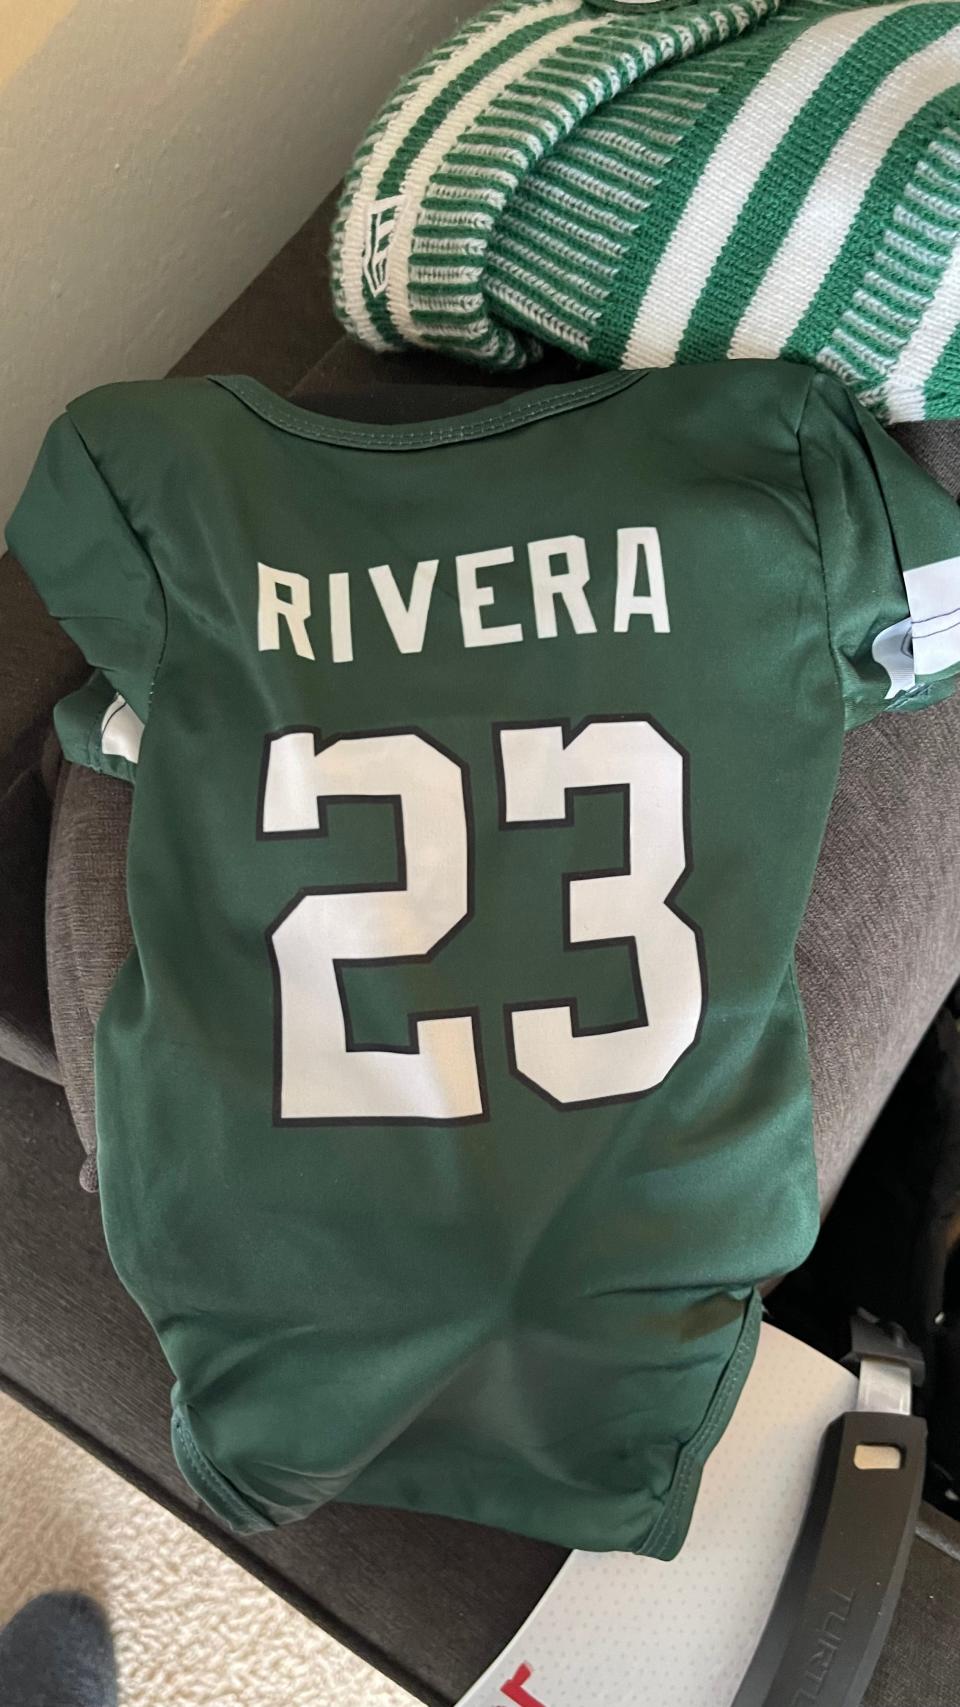 A gift received from well before Baby Rivera's arrival may have sealed his fate as a Jets fan.